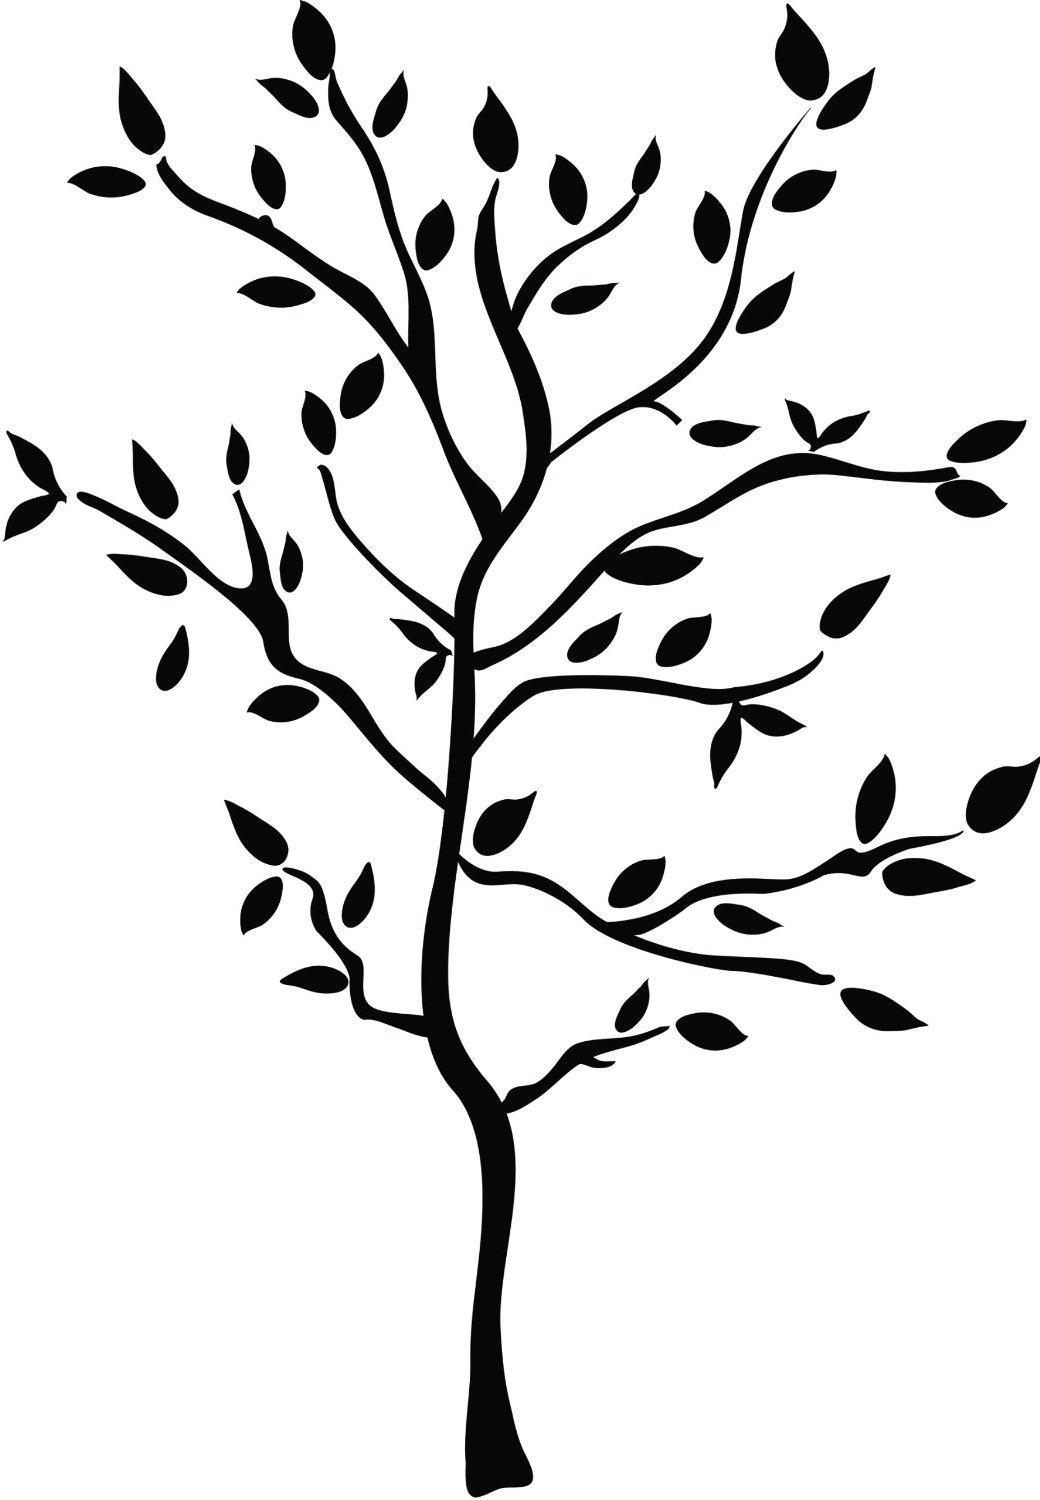 10 Cartoon Trees With Branches Free Cliparts That You Can Download To